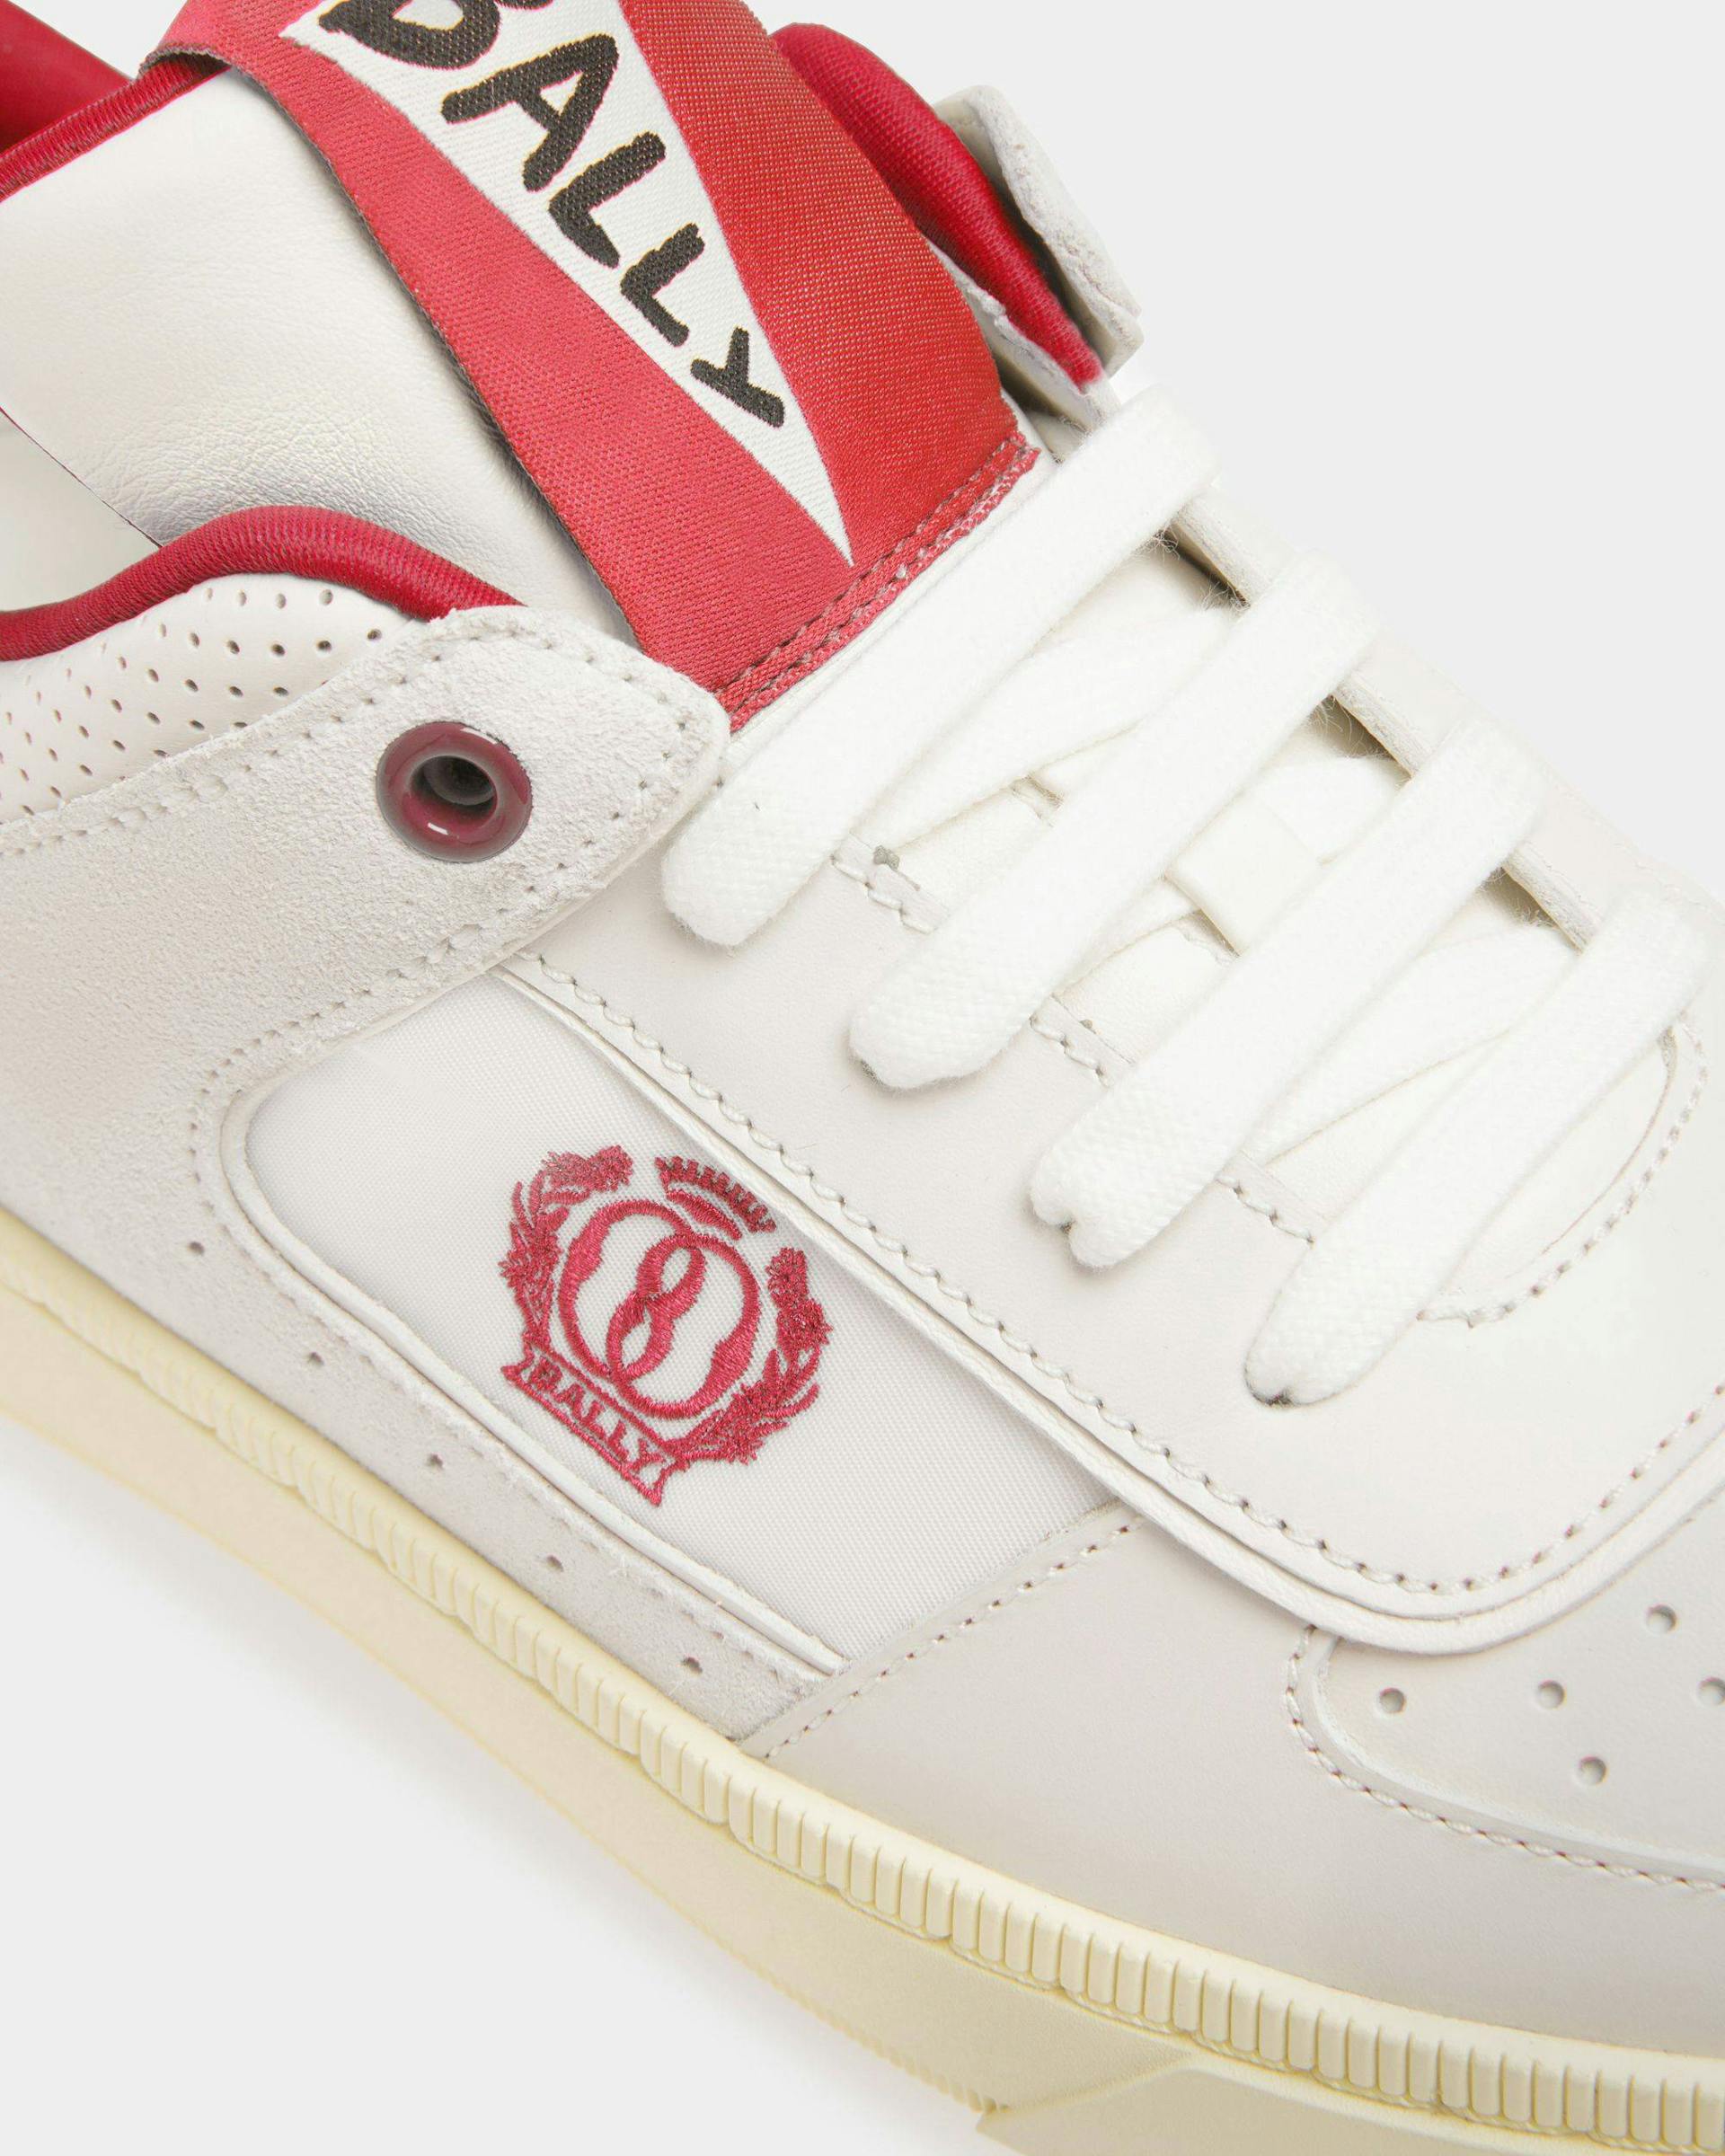 Women's Raise Sneakers In White And Red Leather | Bally | Still Life Detail